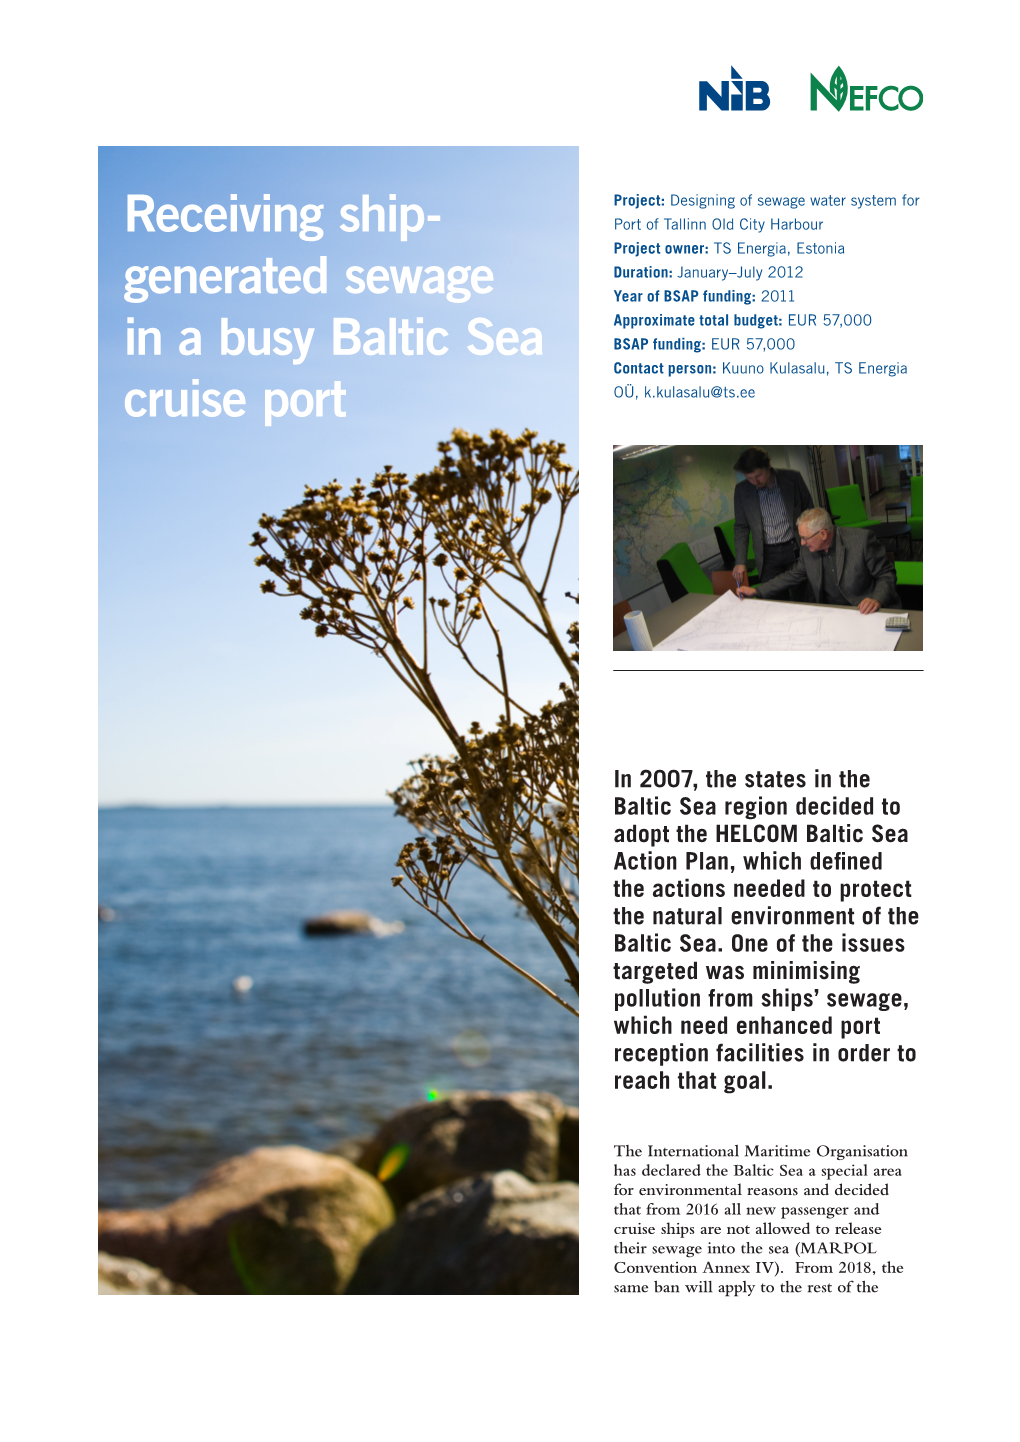 Receiving Ship- Generated Sewage in a Busy Baltic Sea Cruise Port